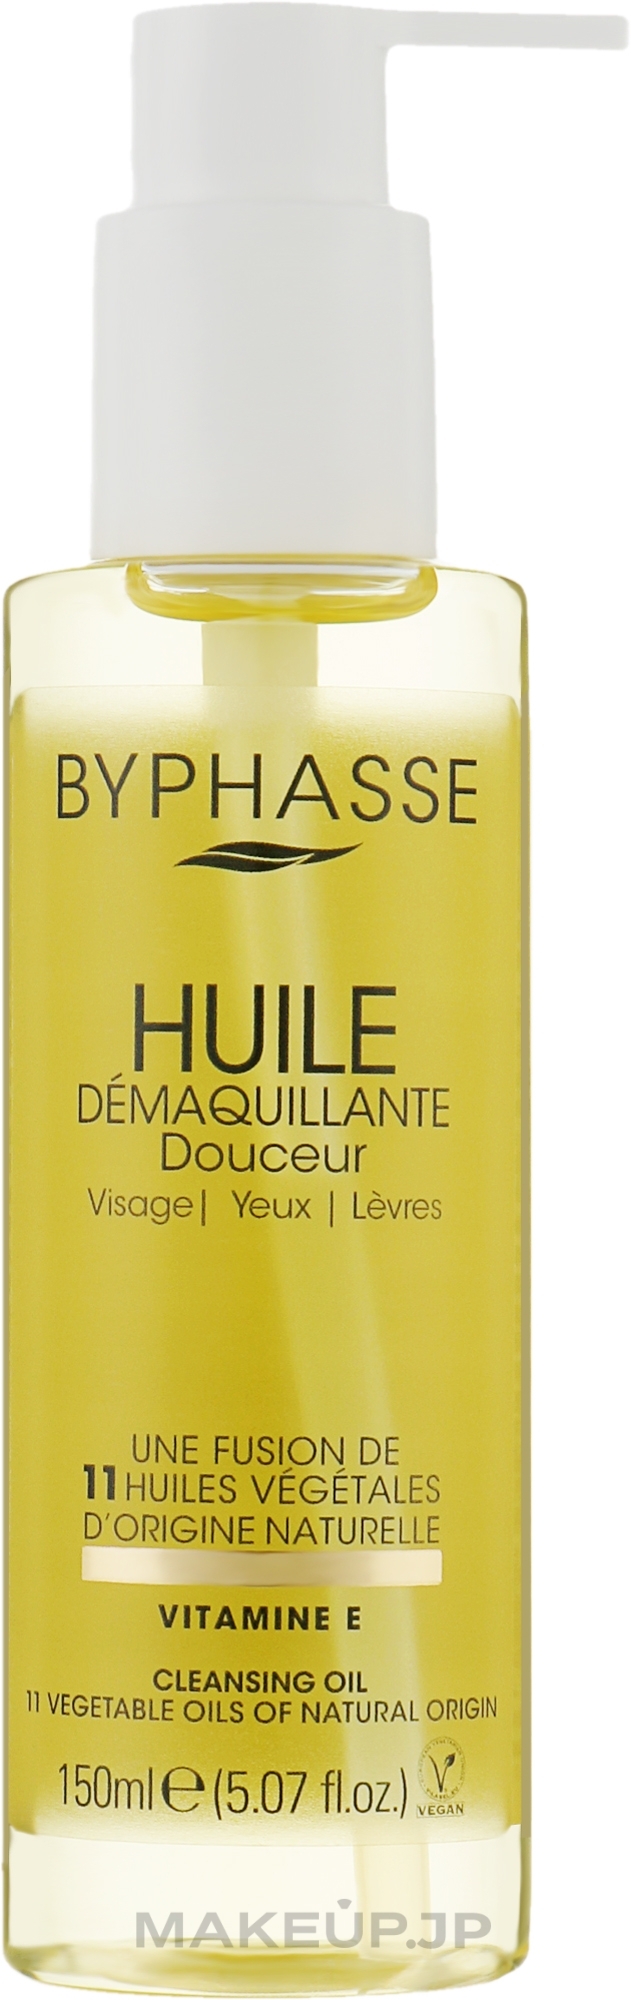 Makeup Remover Oil - Byphasse Douceur Make-up Remover Oil — photo 150 ml